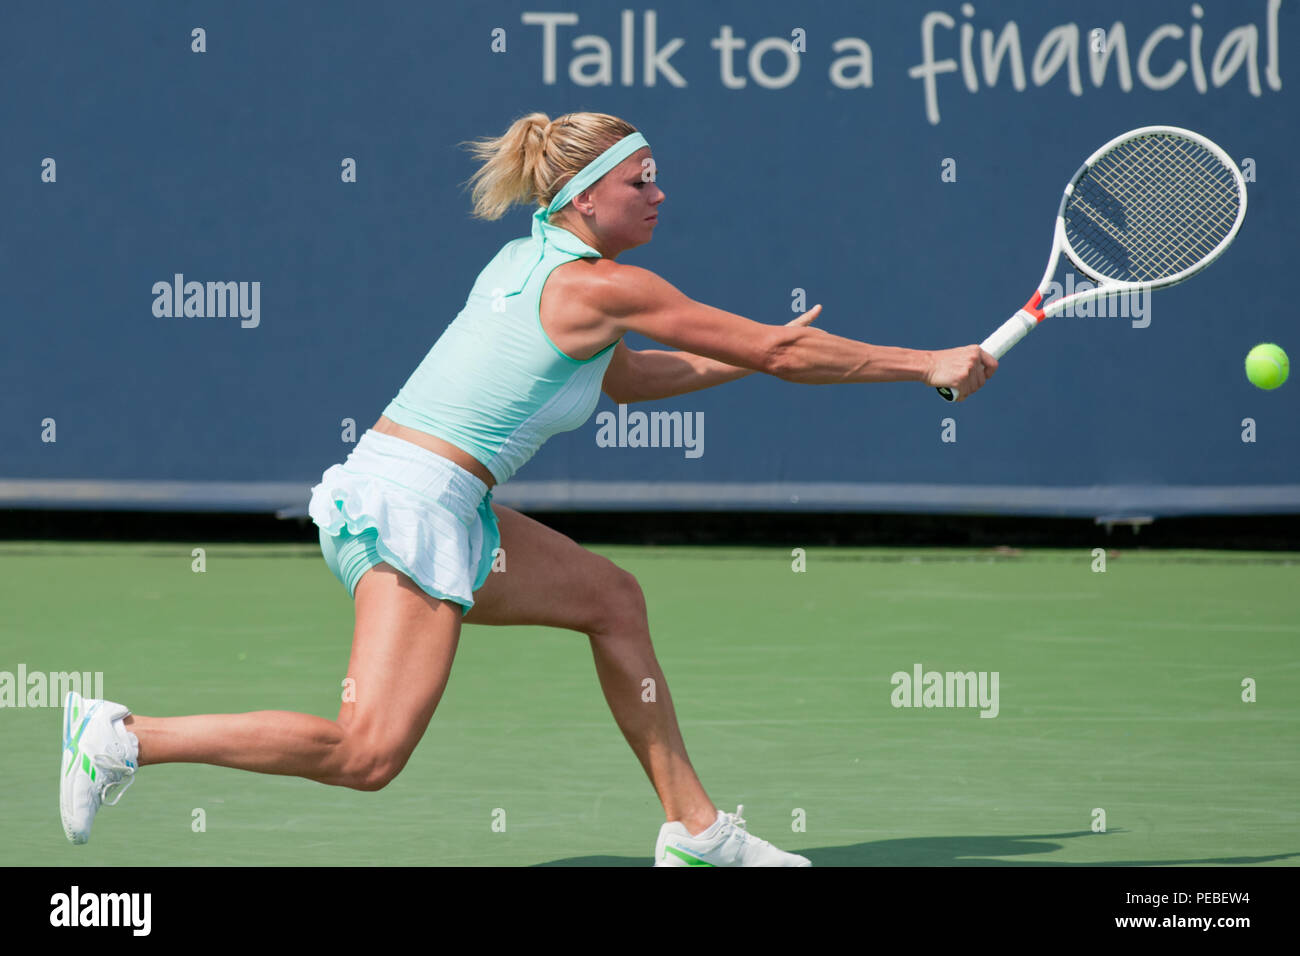 Cincinnati, OH, USA. 14th Aug, 2018. Western and Southern Open Tennis, Cincinnati, OH - August 14, 2018 - Camila Giorgi in action against Anastasija Sevastova in the Western and Southern Tennis tournament held in Cincinnati. - Photo by Wally Nell/ZUMA Press Credit: Wally Nell/ZUMA Wire/Alamy Live News Stock Photo